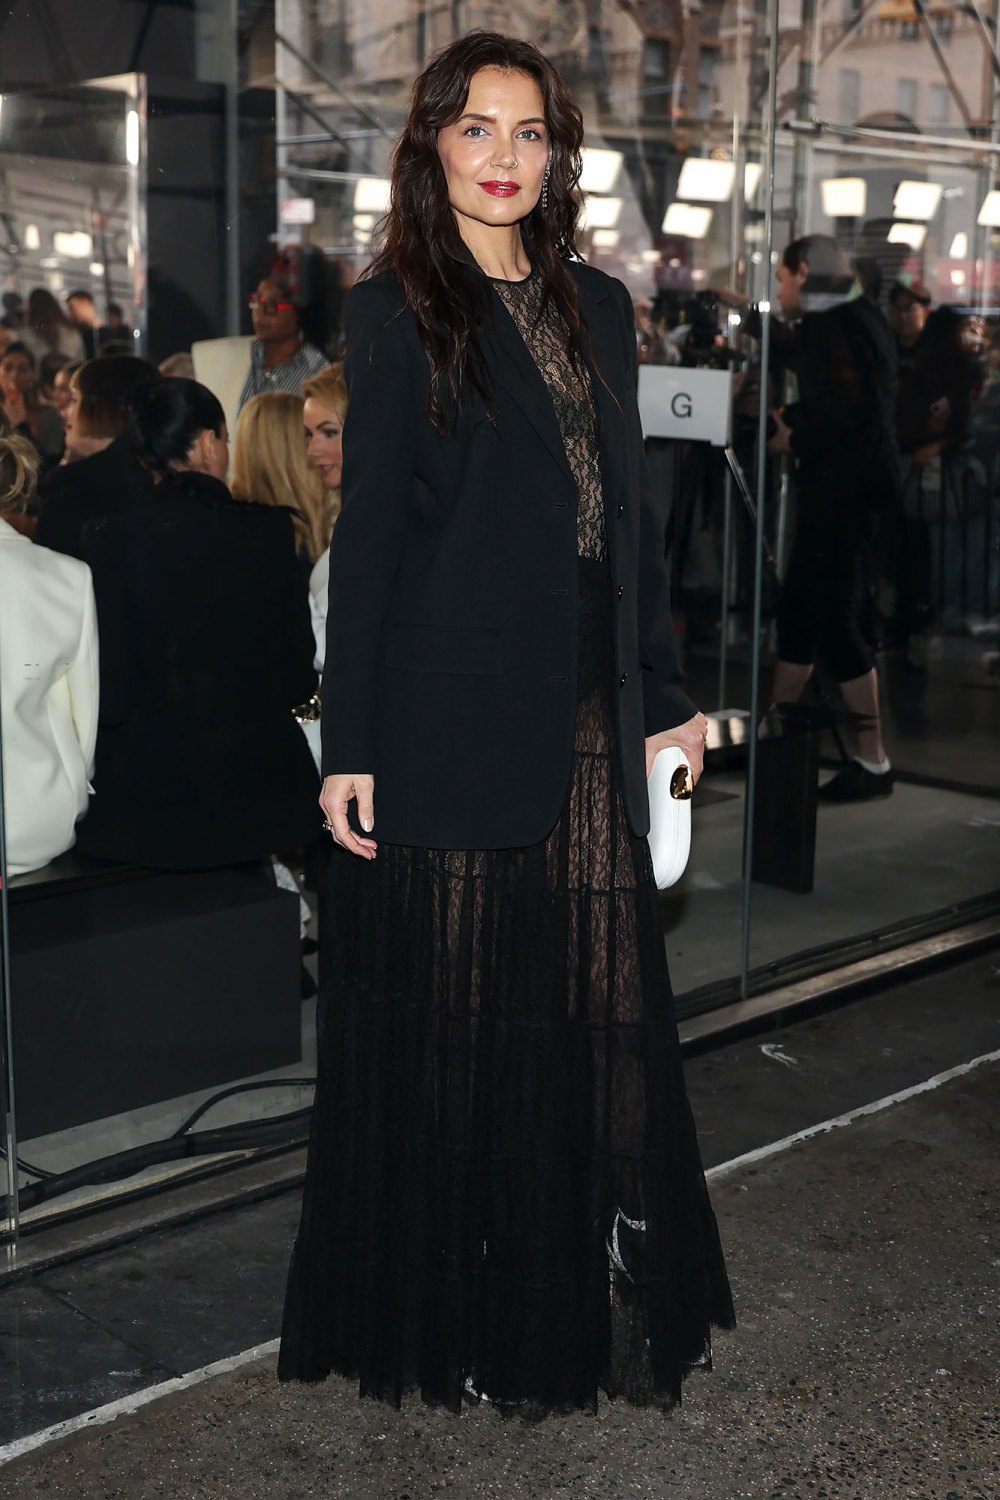 Katie Holmes Puts a Sophisticated Spin on the Goth Aesthetic at New York Fashion Week